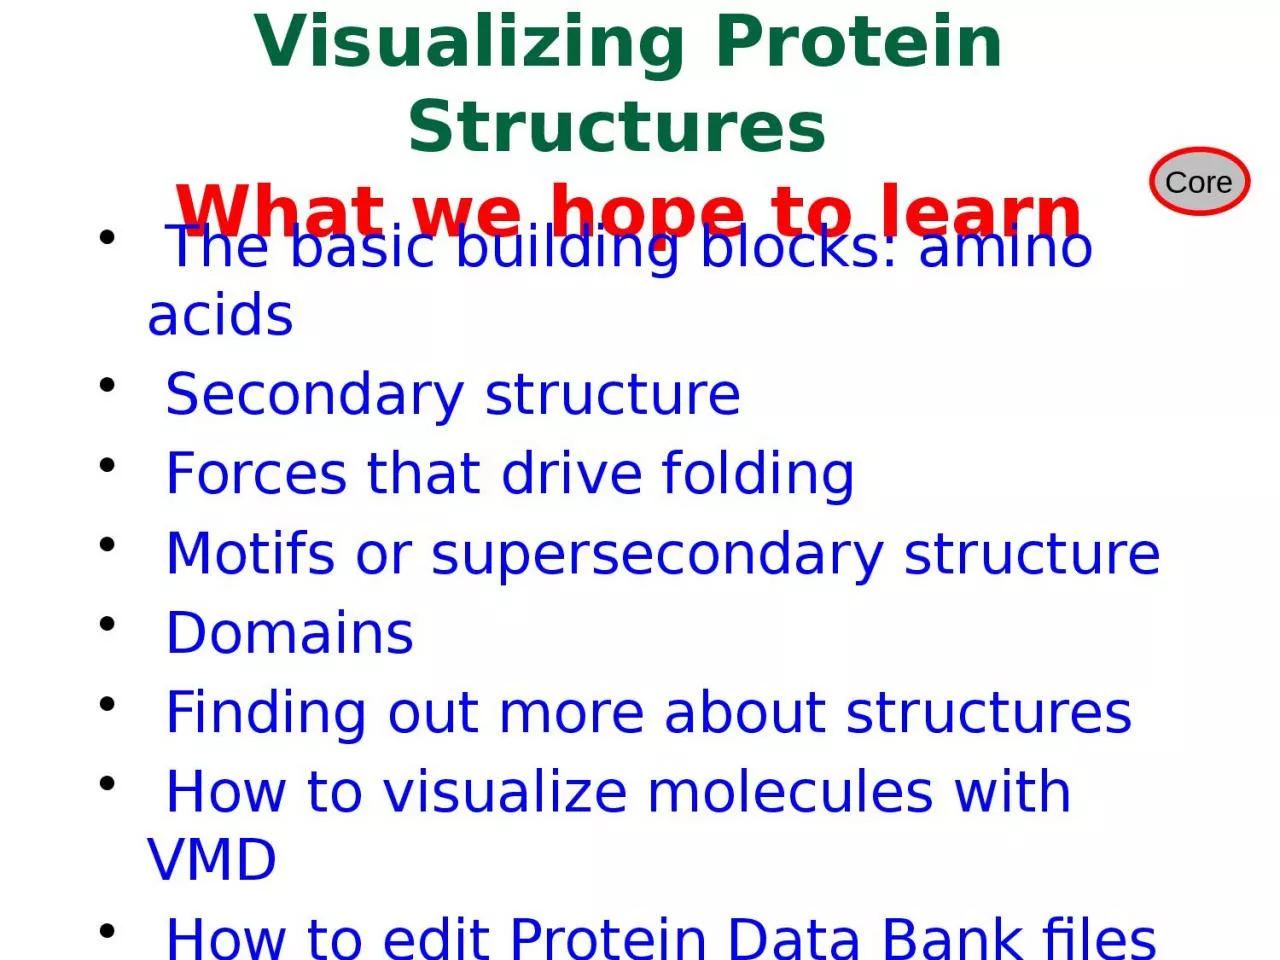 Visualizing Protein Structures